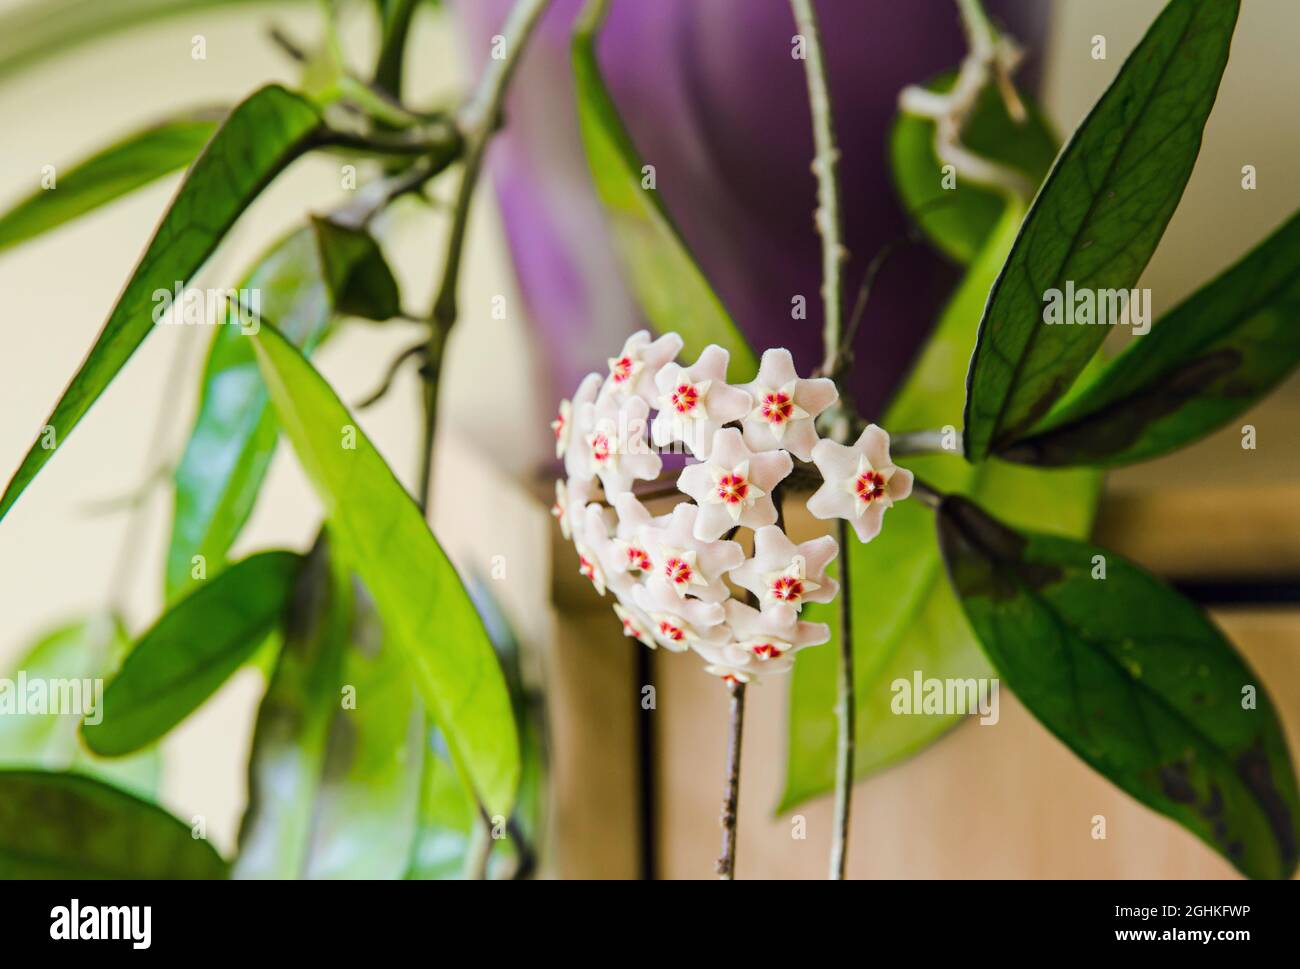 Potted Hoya carnosa the porcelainflower or wax plant in full bloom in home interior. Stock Photo